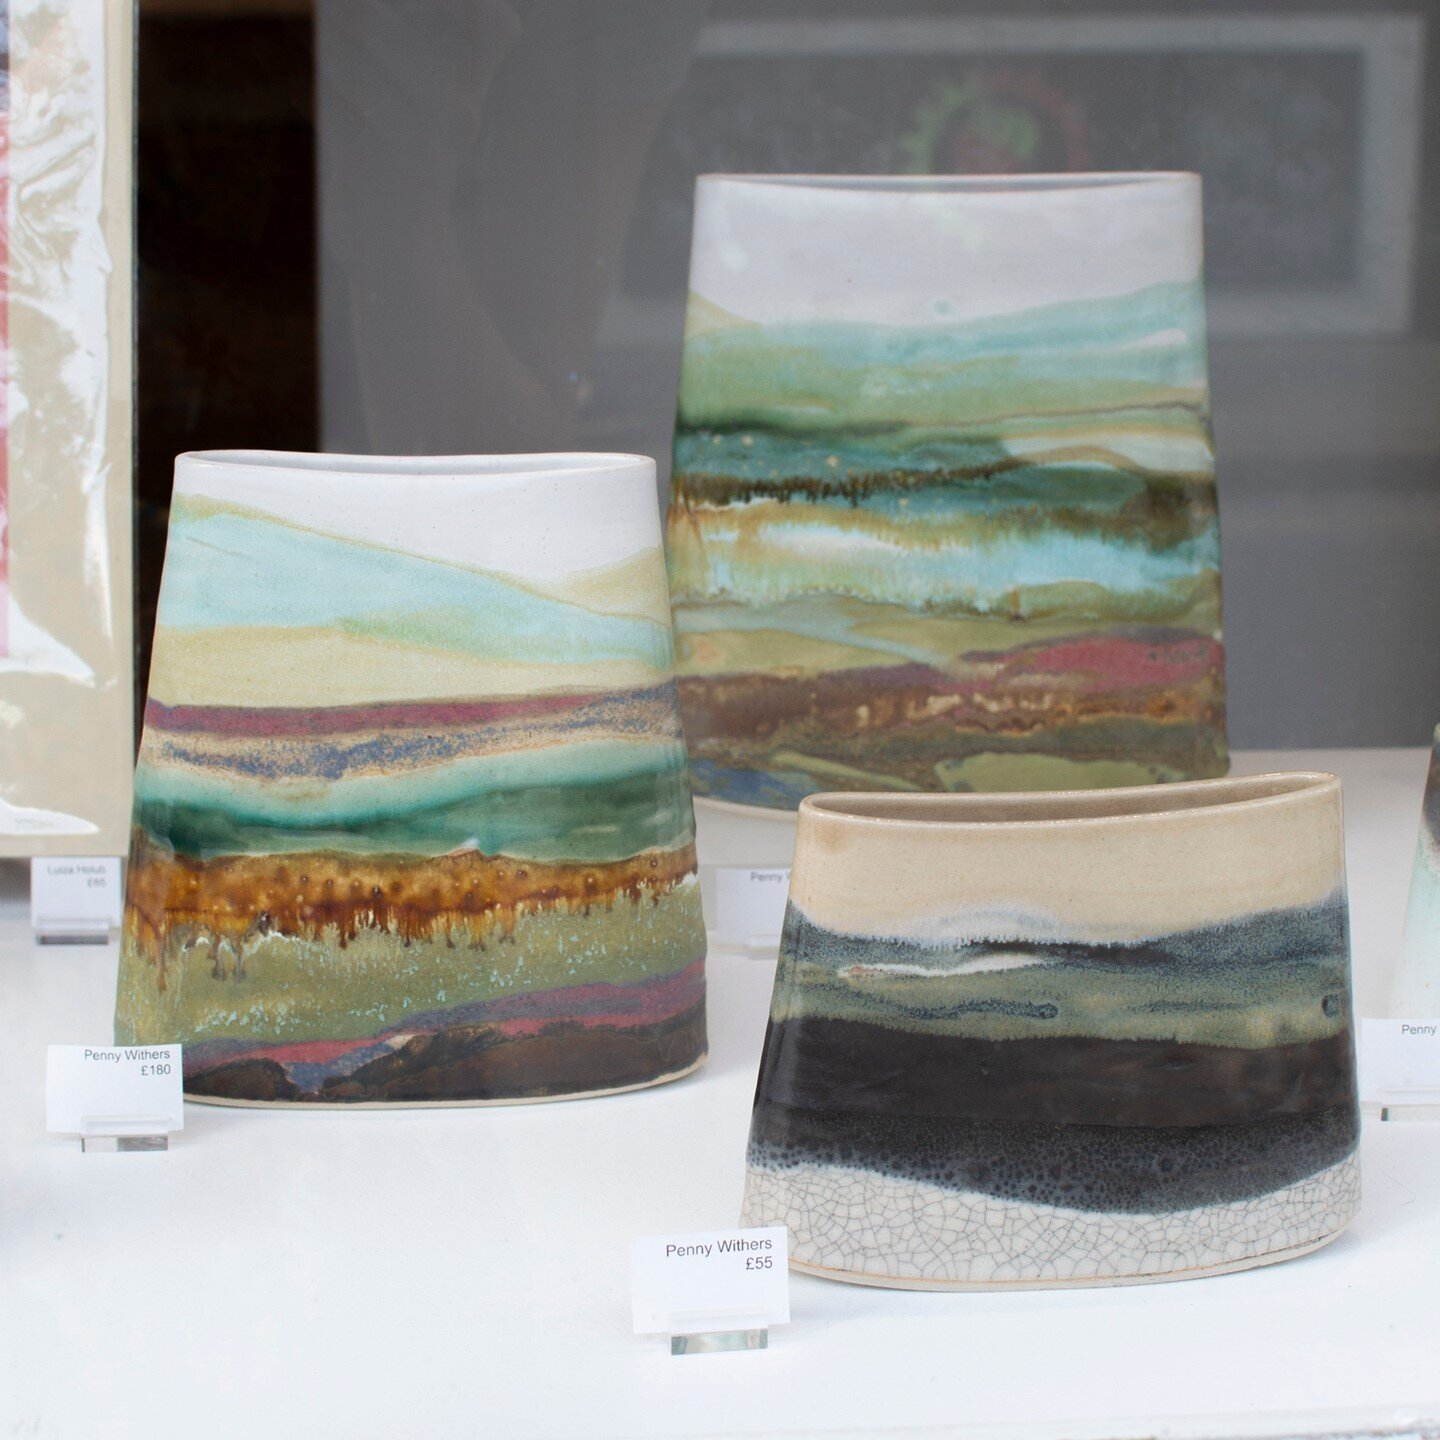 We were delighted to see these vessels by Penny Withers all go to lovely homes over the weekend! 🥰 We have a few pieces left by Penny which can be found online or in the gallery.⁠
⁠
www.cambridgecrafts.co.uk/penny-withers⁠
@pennywithers⁠
⁠
⁠
⁠
⁠
#ca